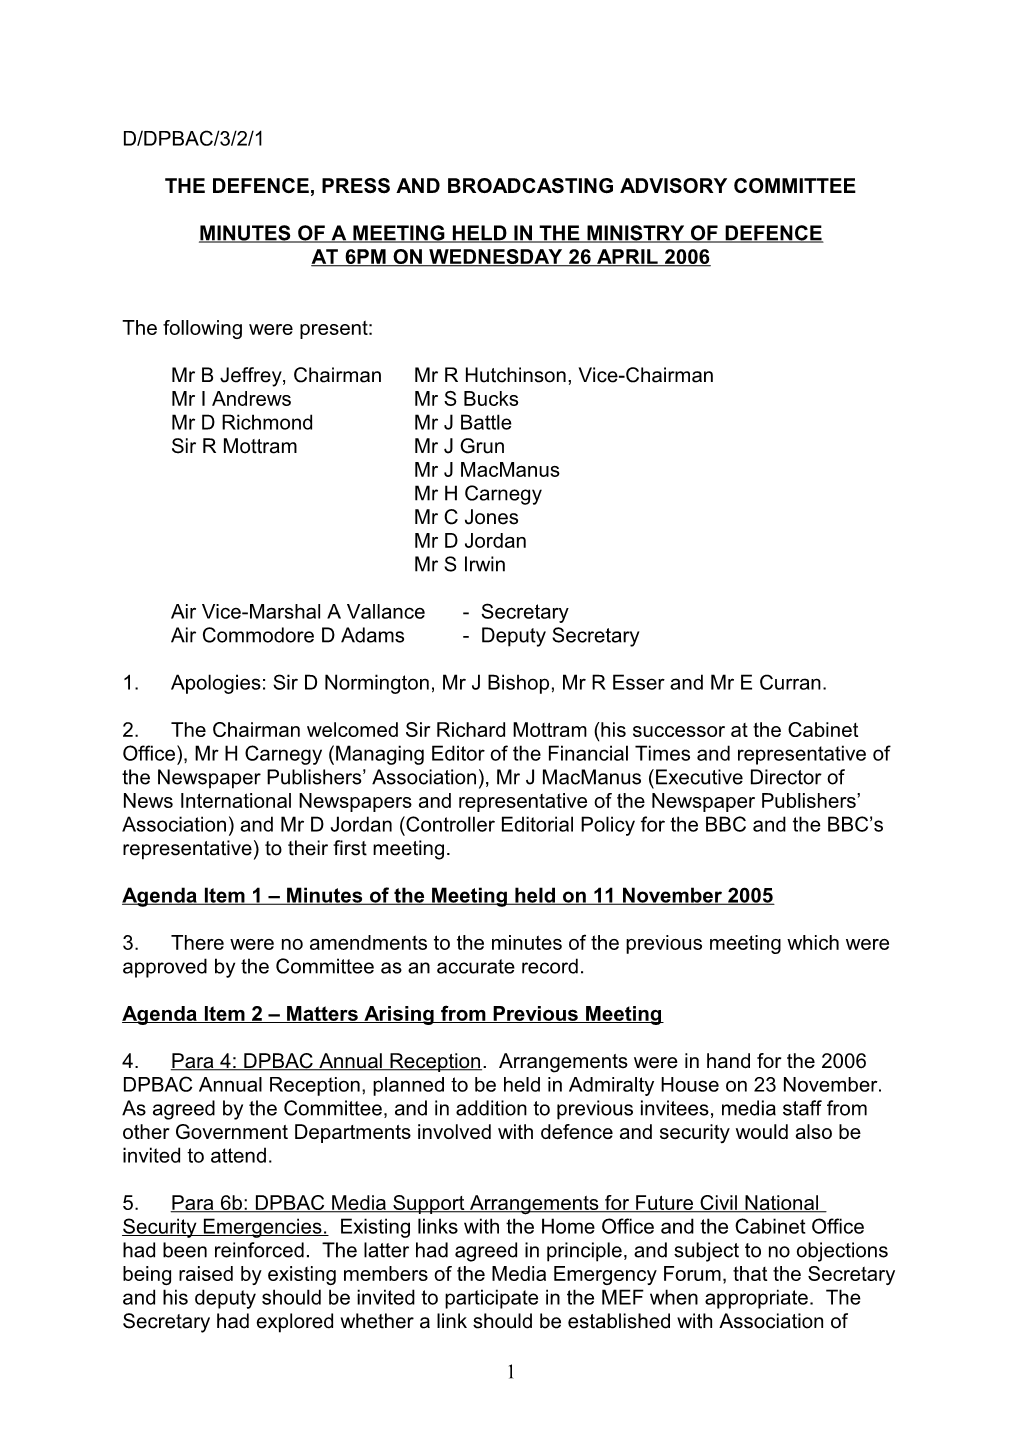 The Defence, Press and Broadcasting Advisory Committee